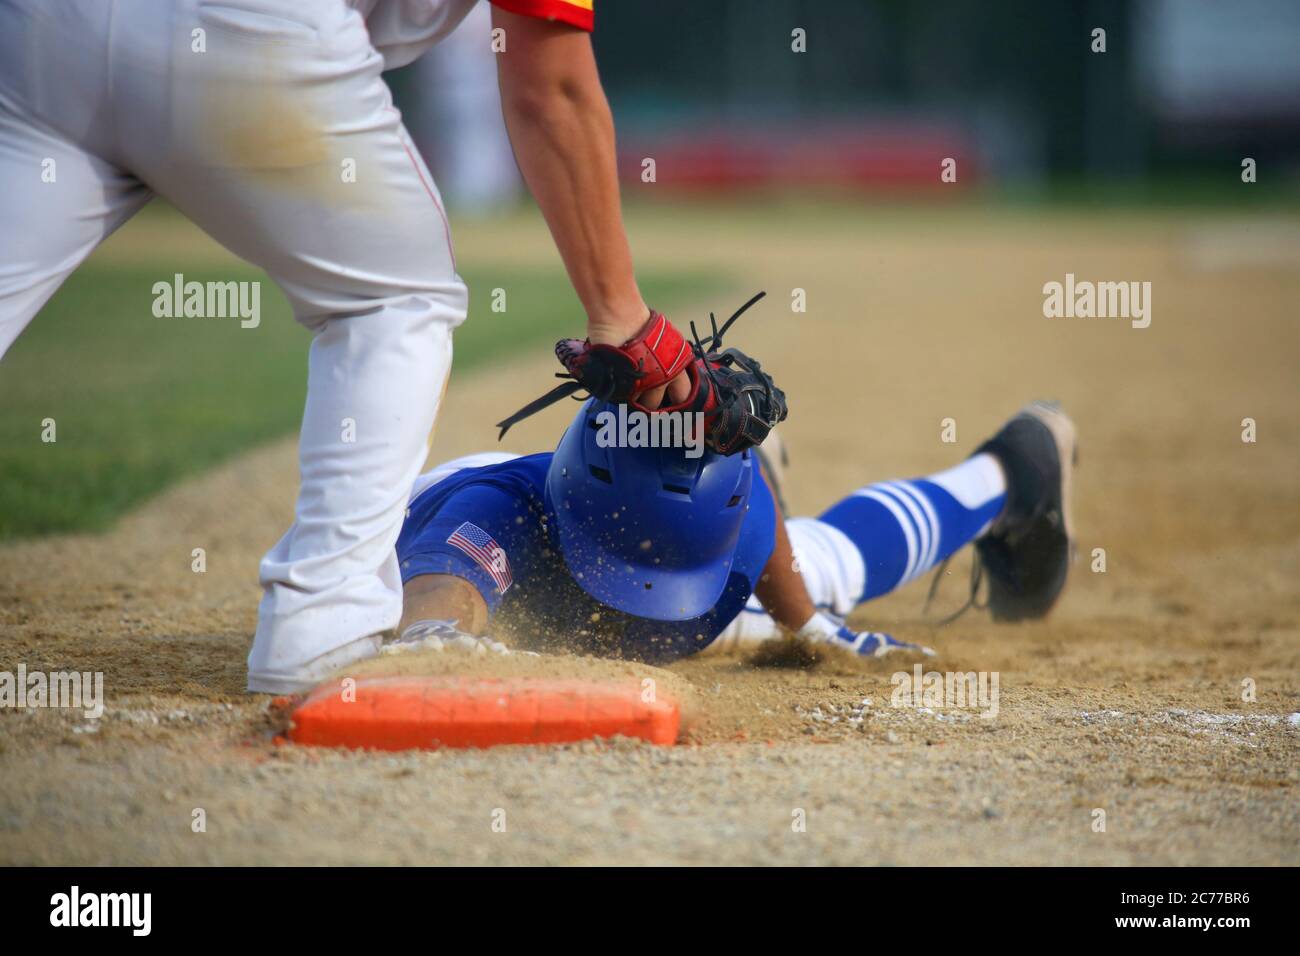 A baseball first baseman tags a base runner out on a pick-off play in a close-up image with space for copy in the upper right of the frame. Stock Photo